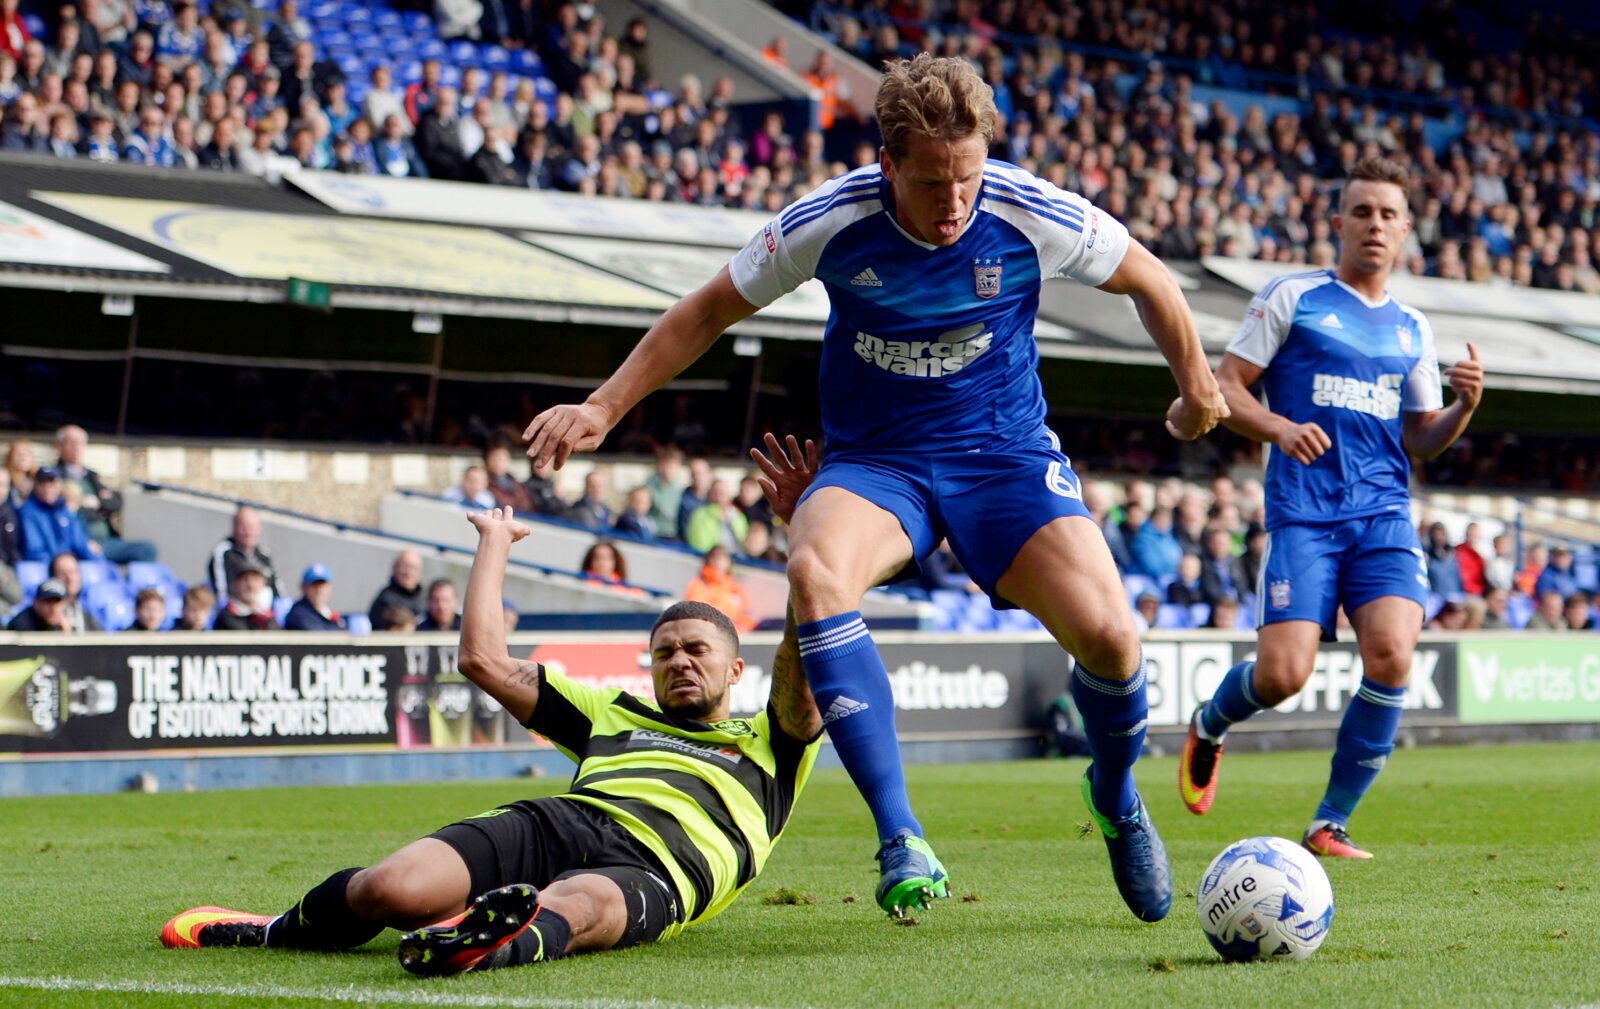 Britain Soccer Football - Ipswich Town v Huddersfield Town - Sky Bet Championship - Portman Road - 1/10/16
Ipswich Town's Christophe Berra in action with Huddersfield Town's Nahki Wells
Mandatory Credit: Action Images / Adam Holt
Livepic
EDITORIAL USE ONLY.